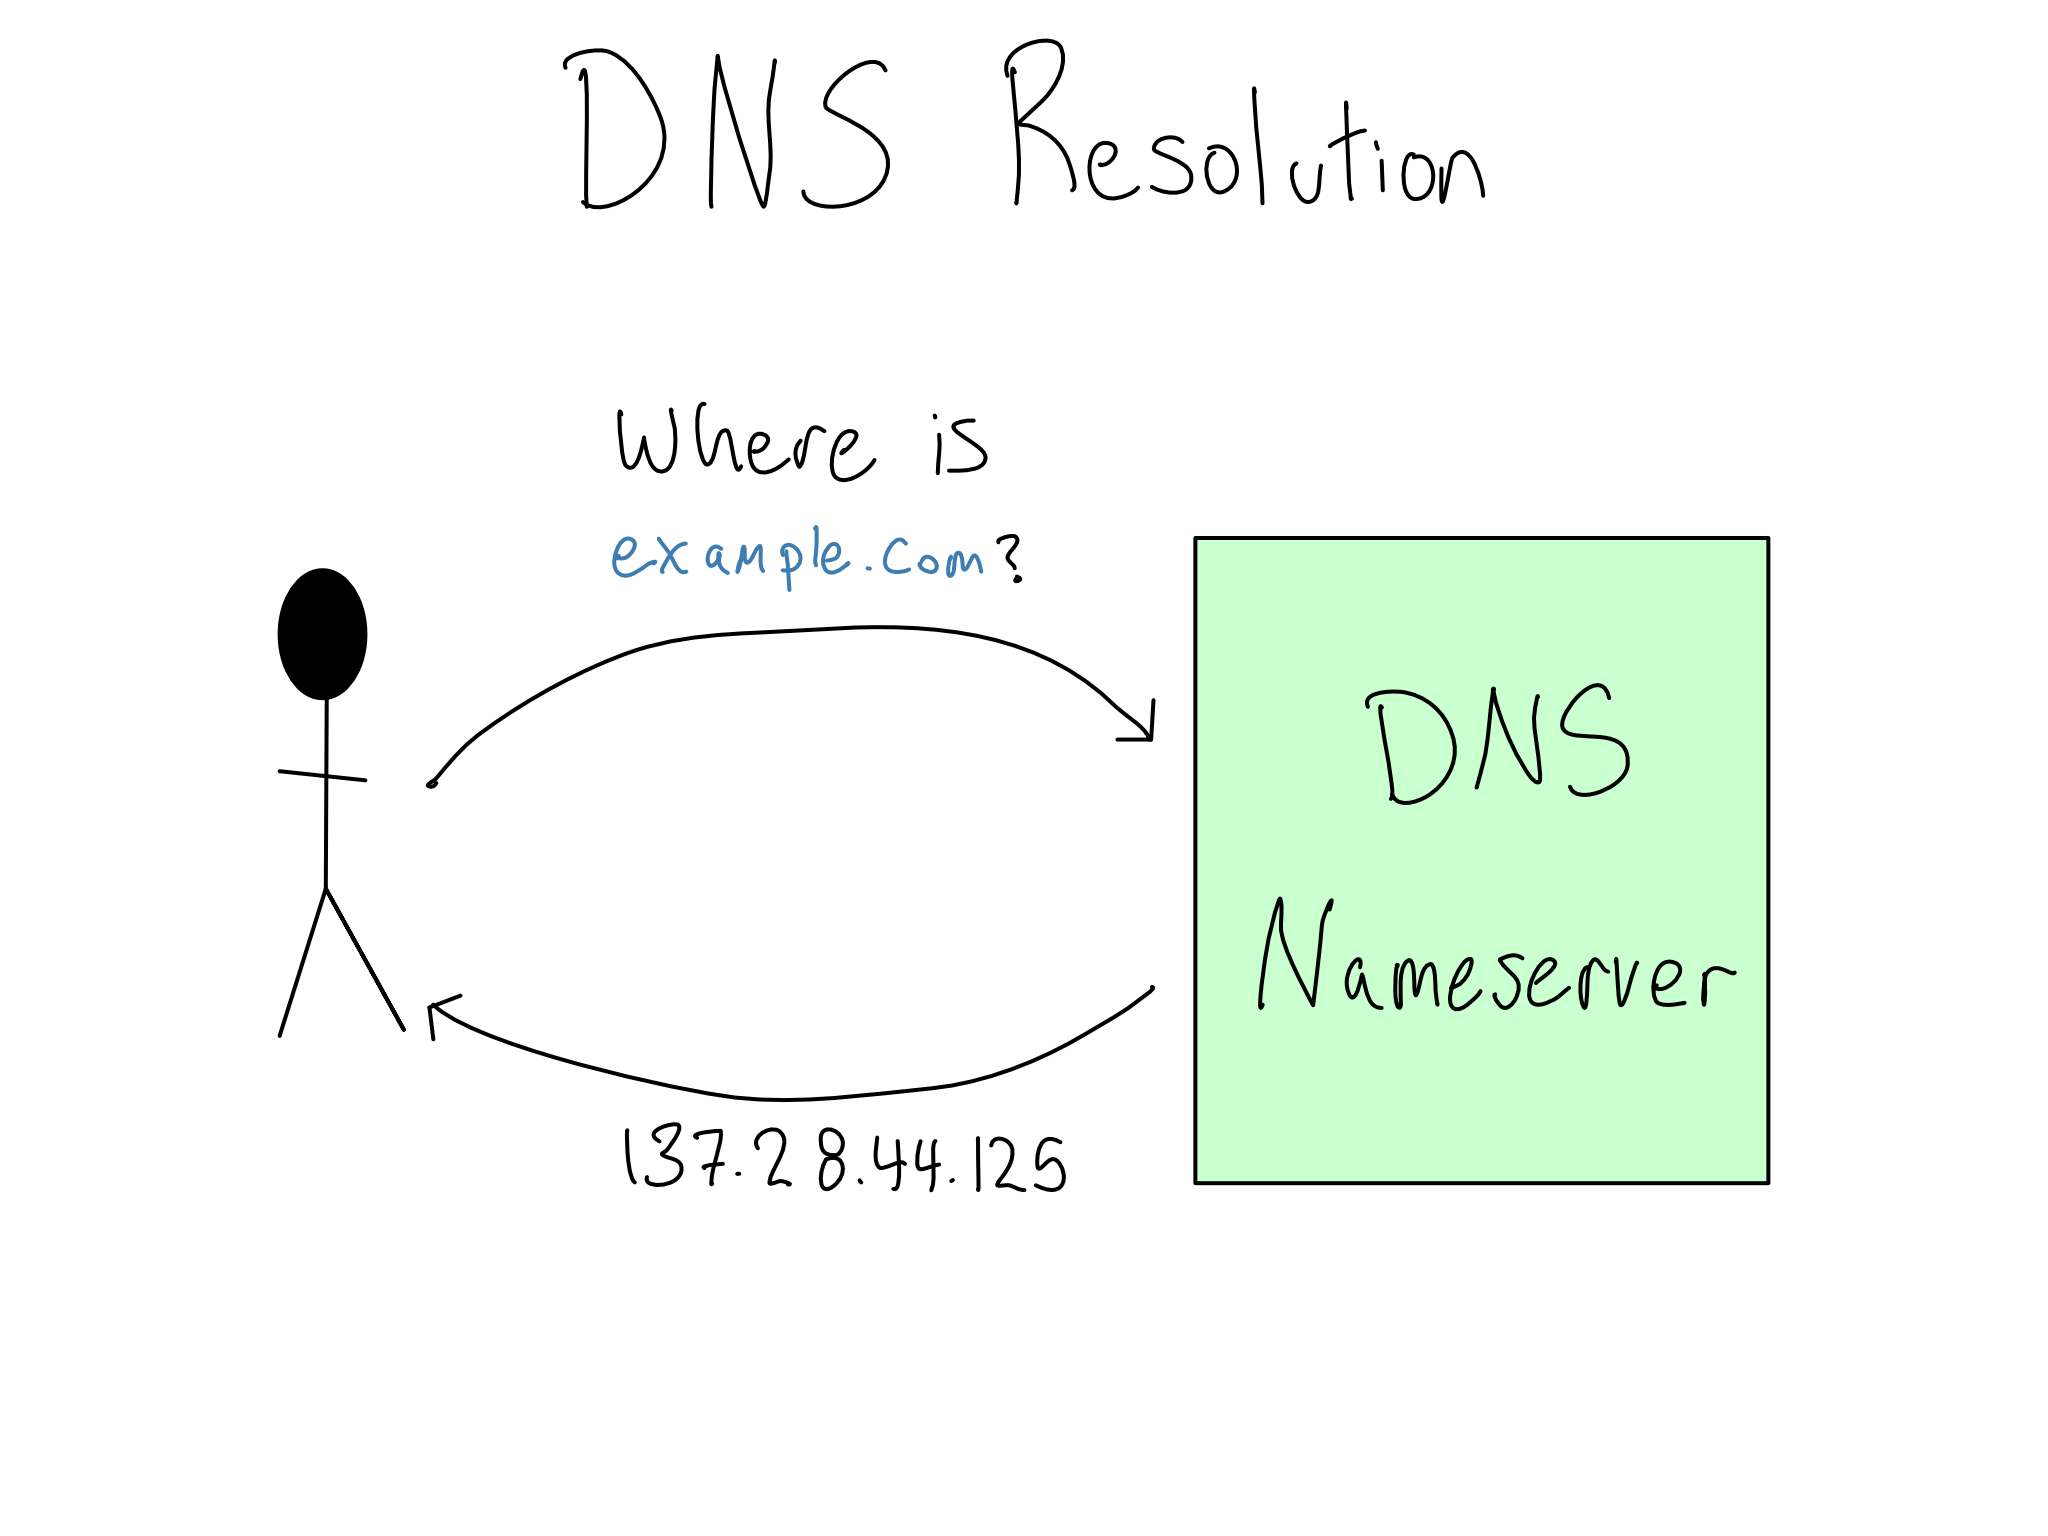 An image of the user querying a DNS nameserver for example.com and getting back an IP address.